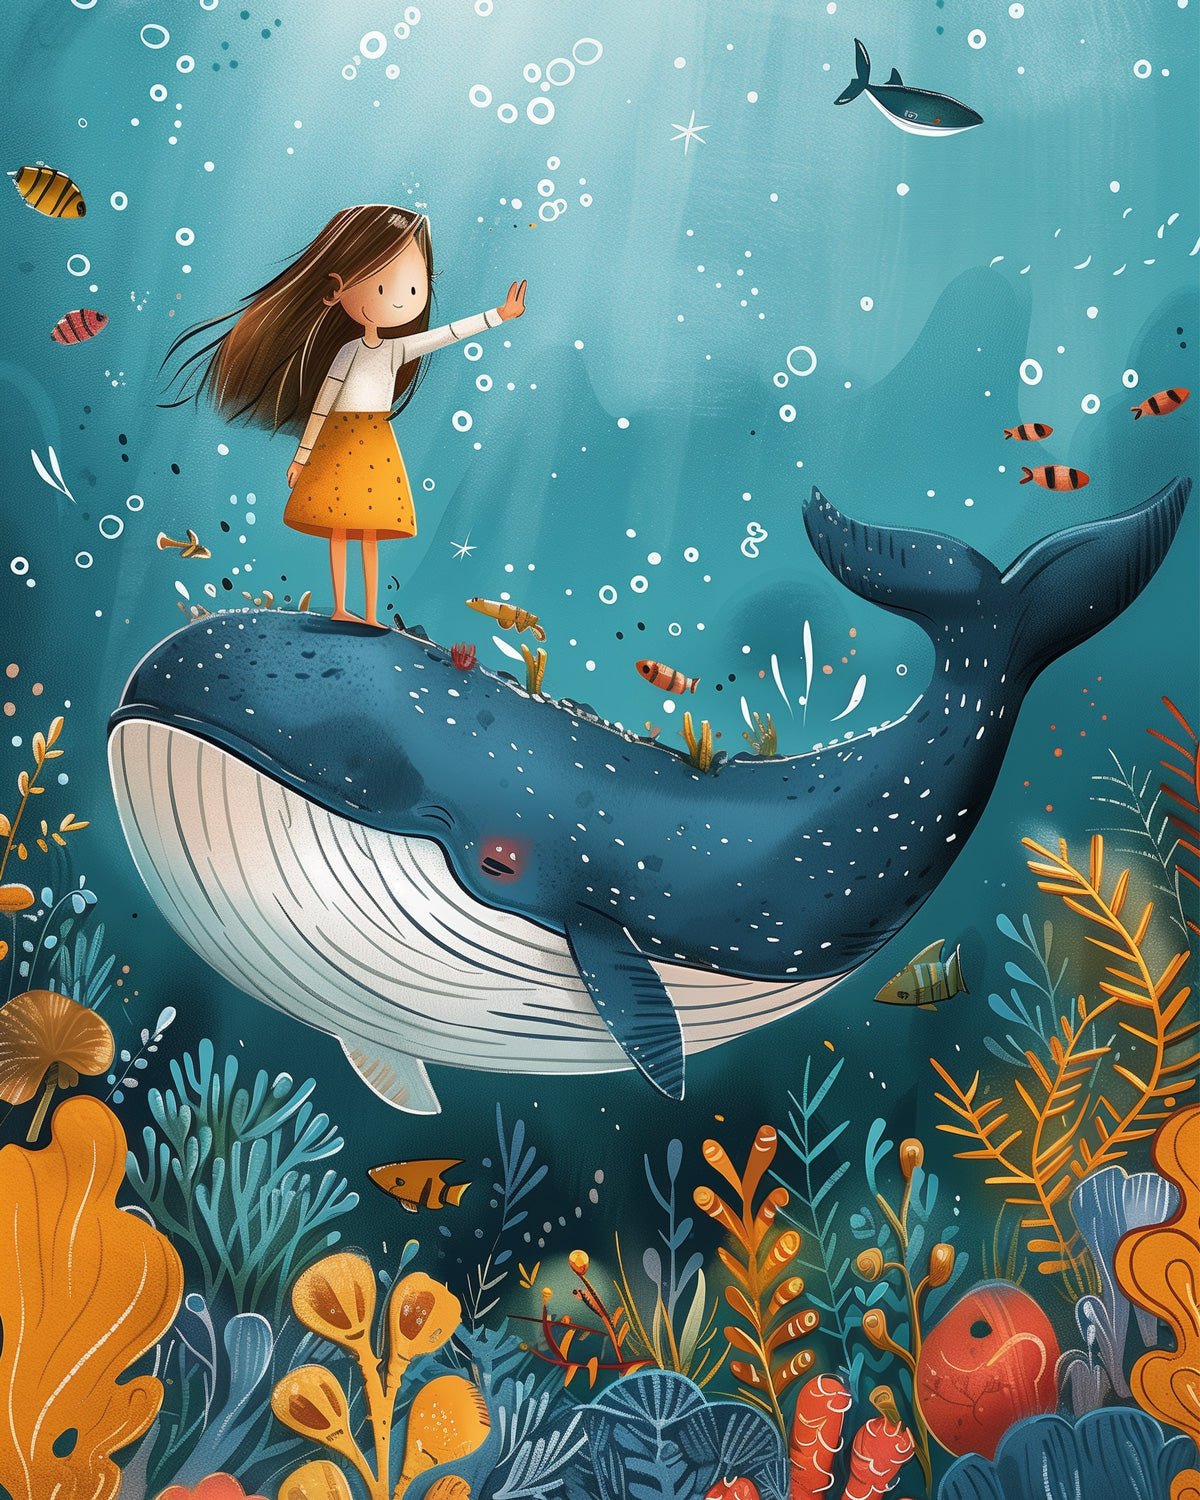 Underwater World Whale with Girl - BestPaintByNumbers - Paint by Numbers Custom Kit